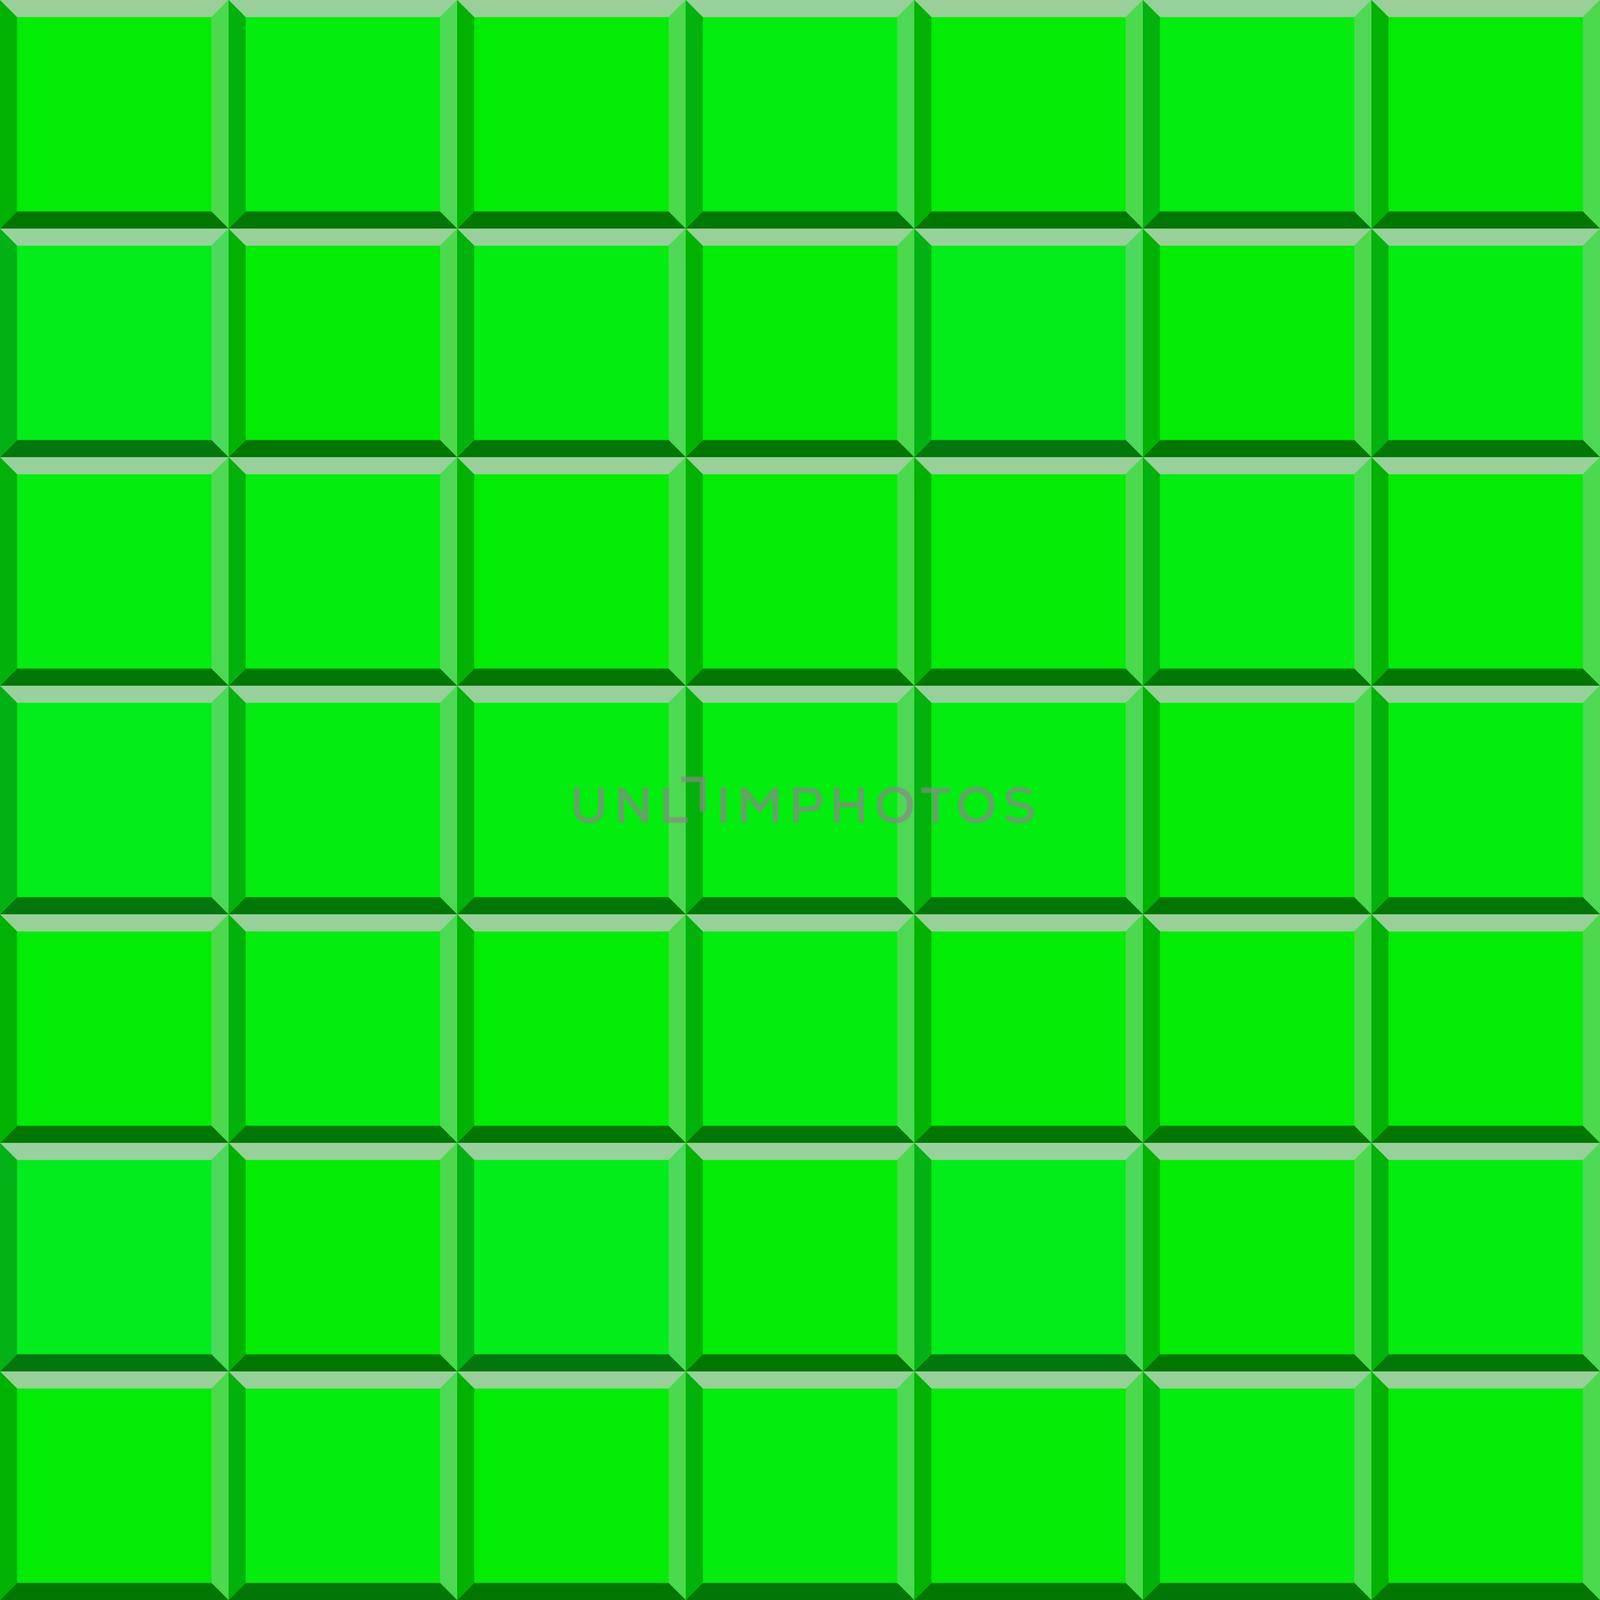 Green square pattern on solid sheet of wallpaper. Concept of home decor and interior designing by tabishere